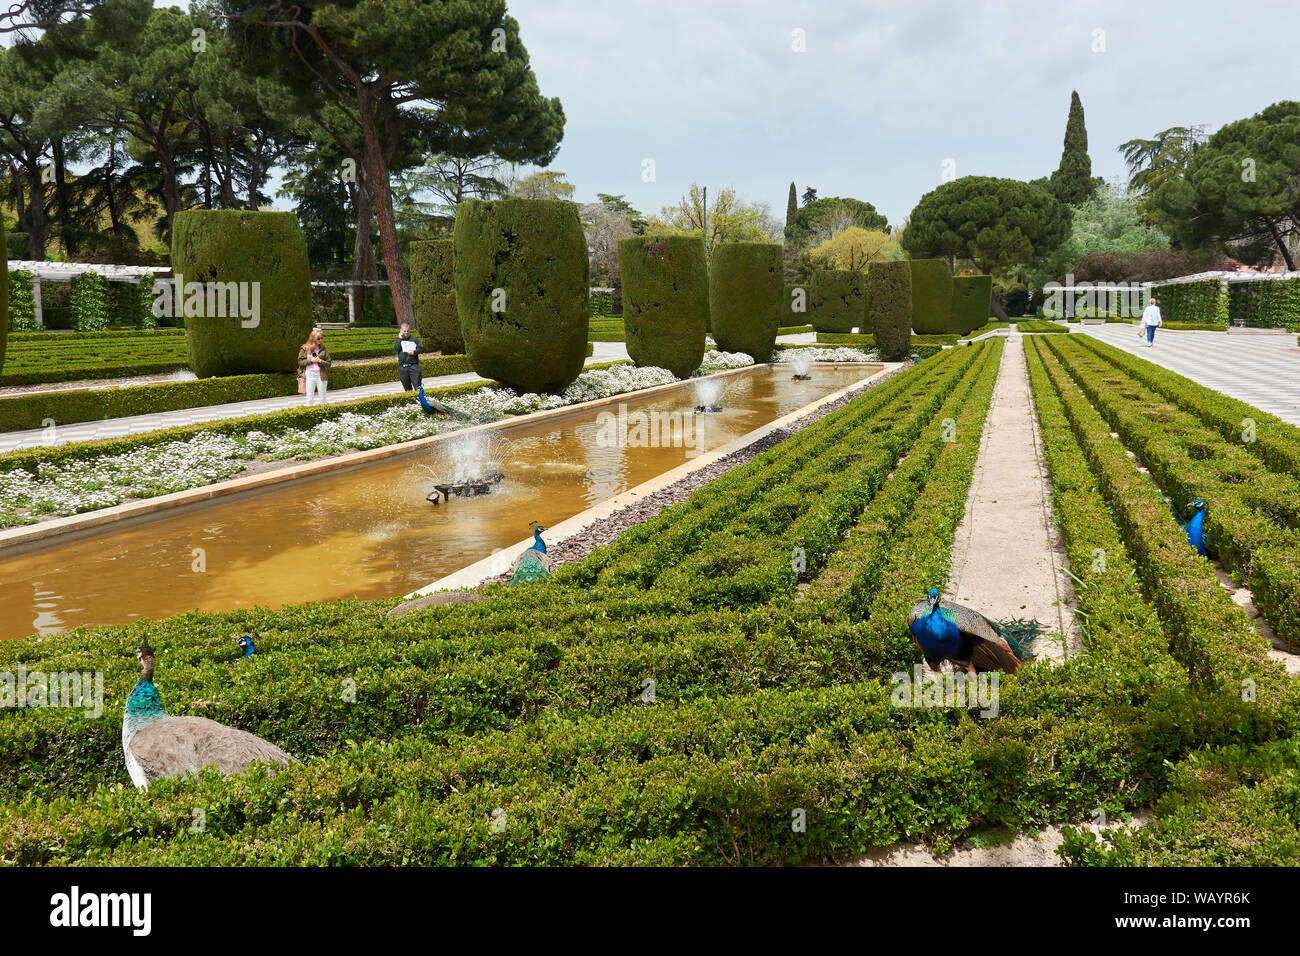 MADRID, SPAIN - APRIL 23, 2018: View of the Gardens of Cecilio Rodriguez with peafowls and a water pond in the Buen Retiro Park in Madrid, Spain. Stock Photo